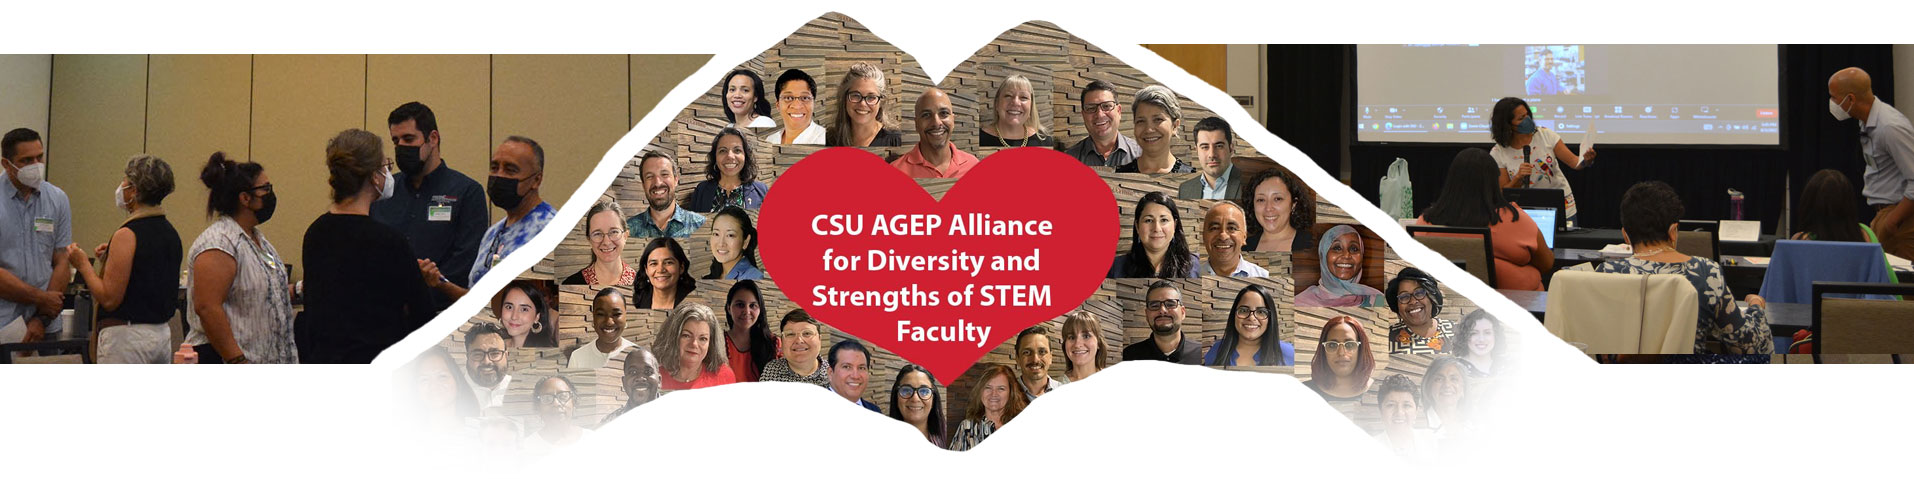 CSU AGEP Alliance for Diversity and Strengths of STEM Faculty